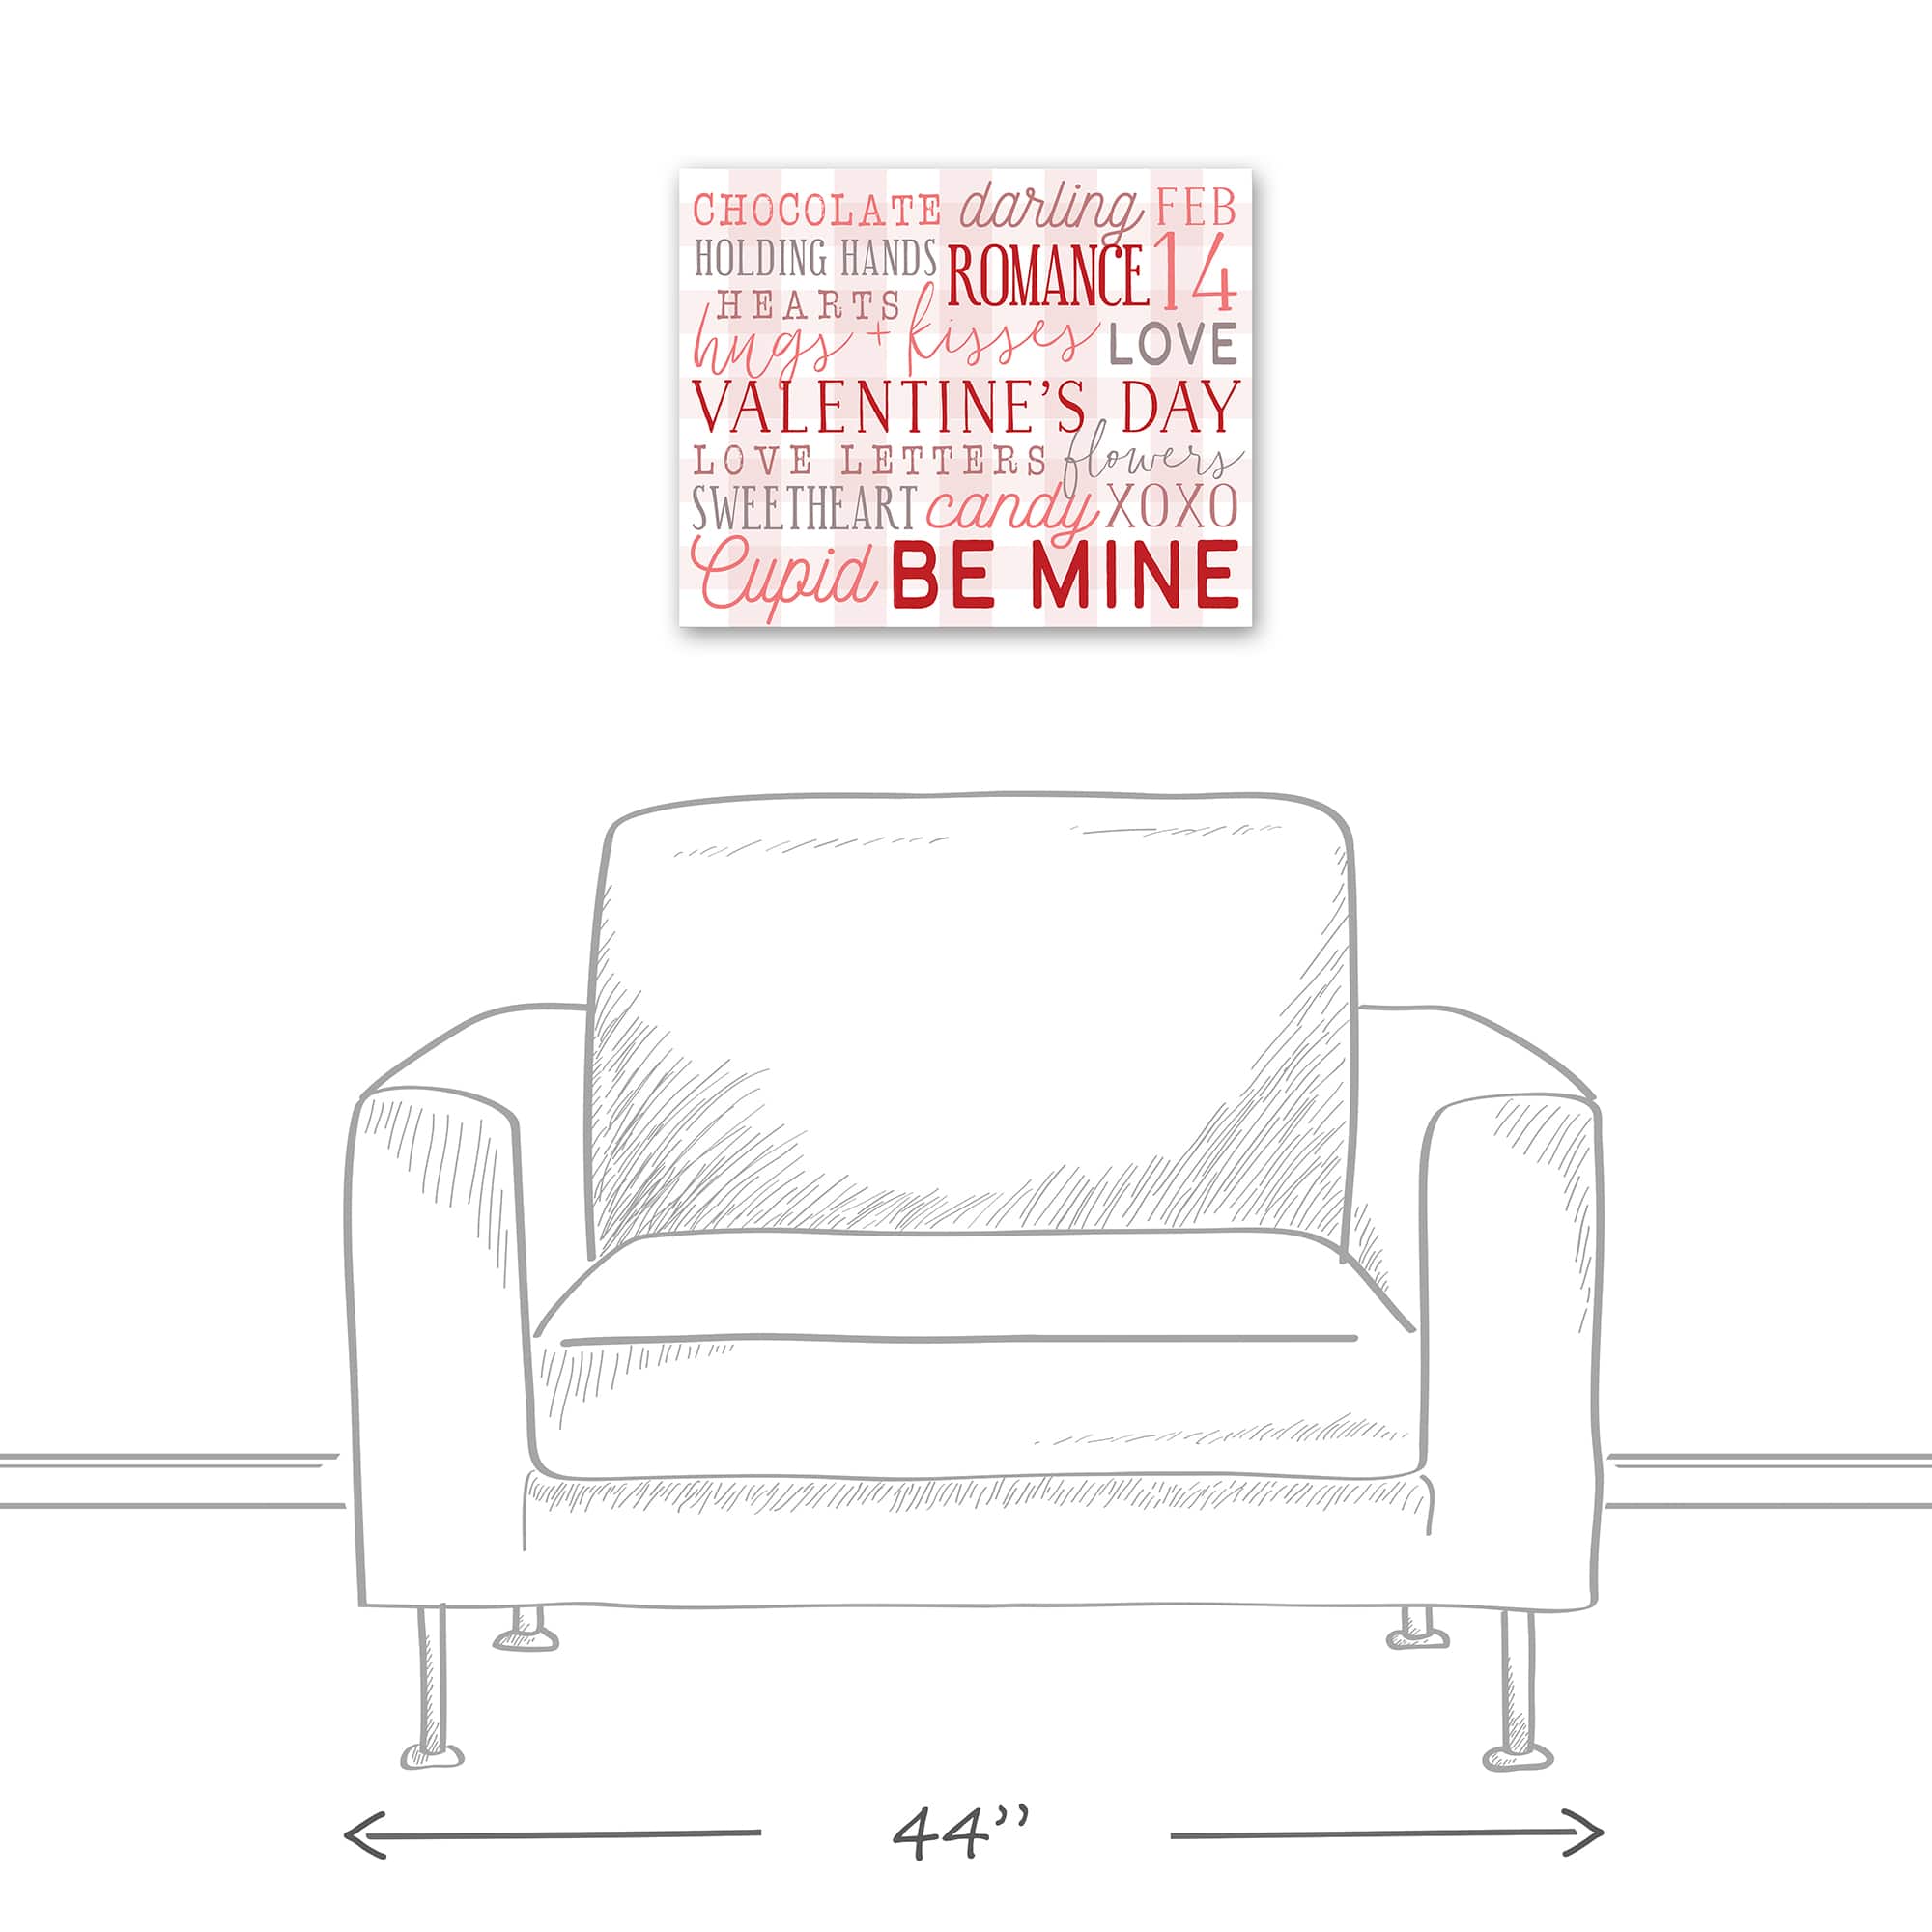 Valentines Day Words Canvas Wall Art